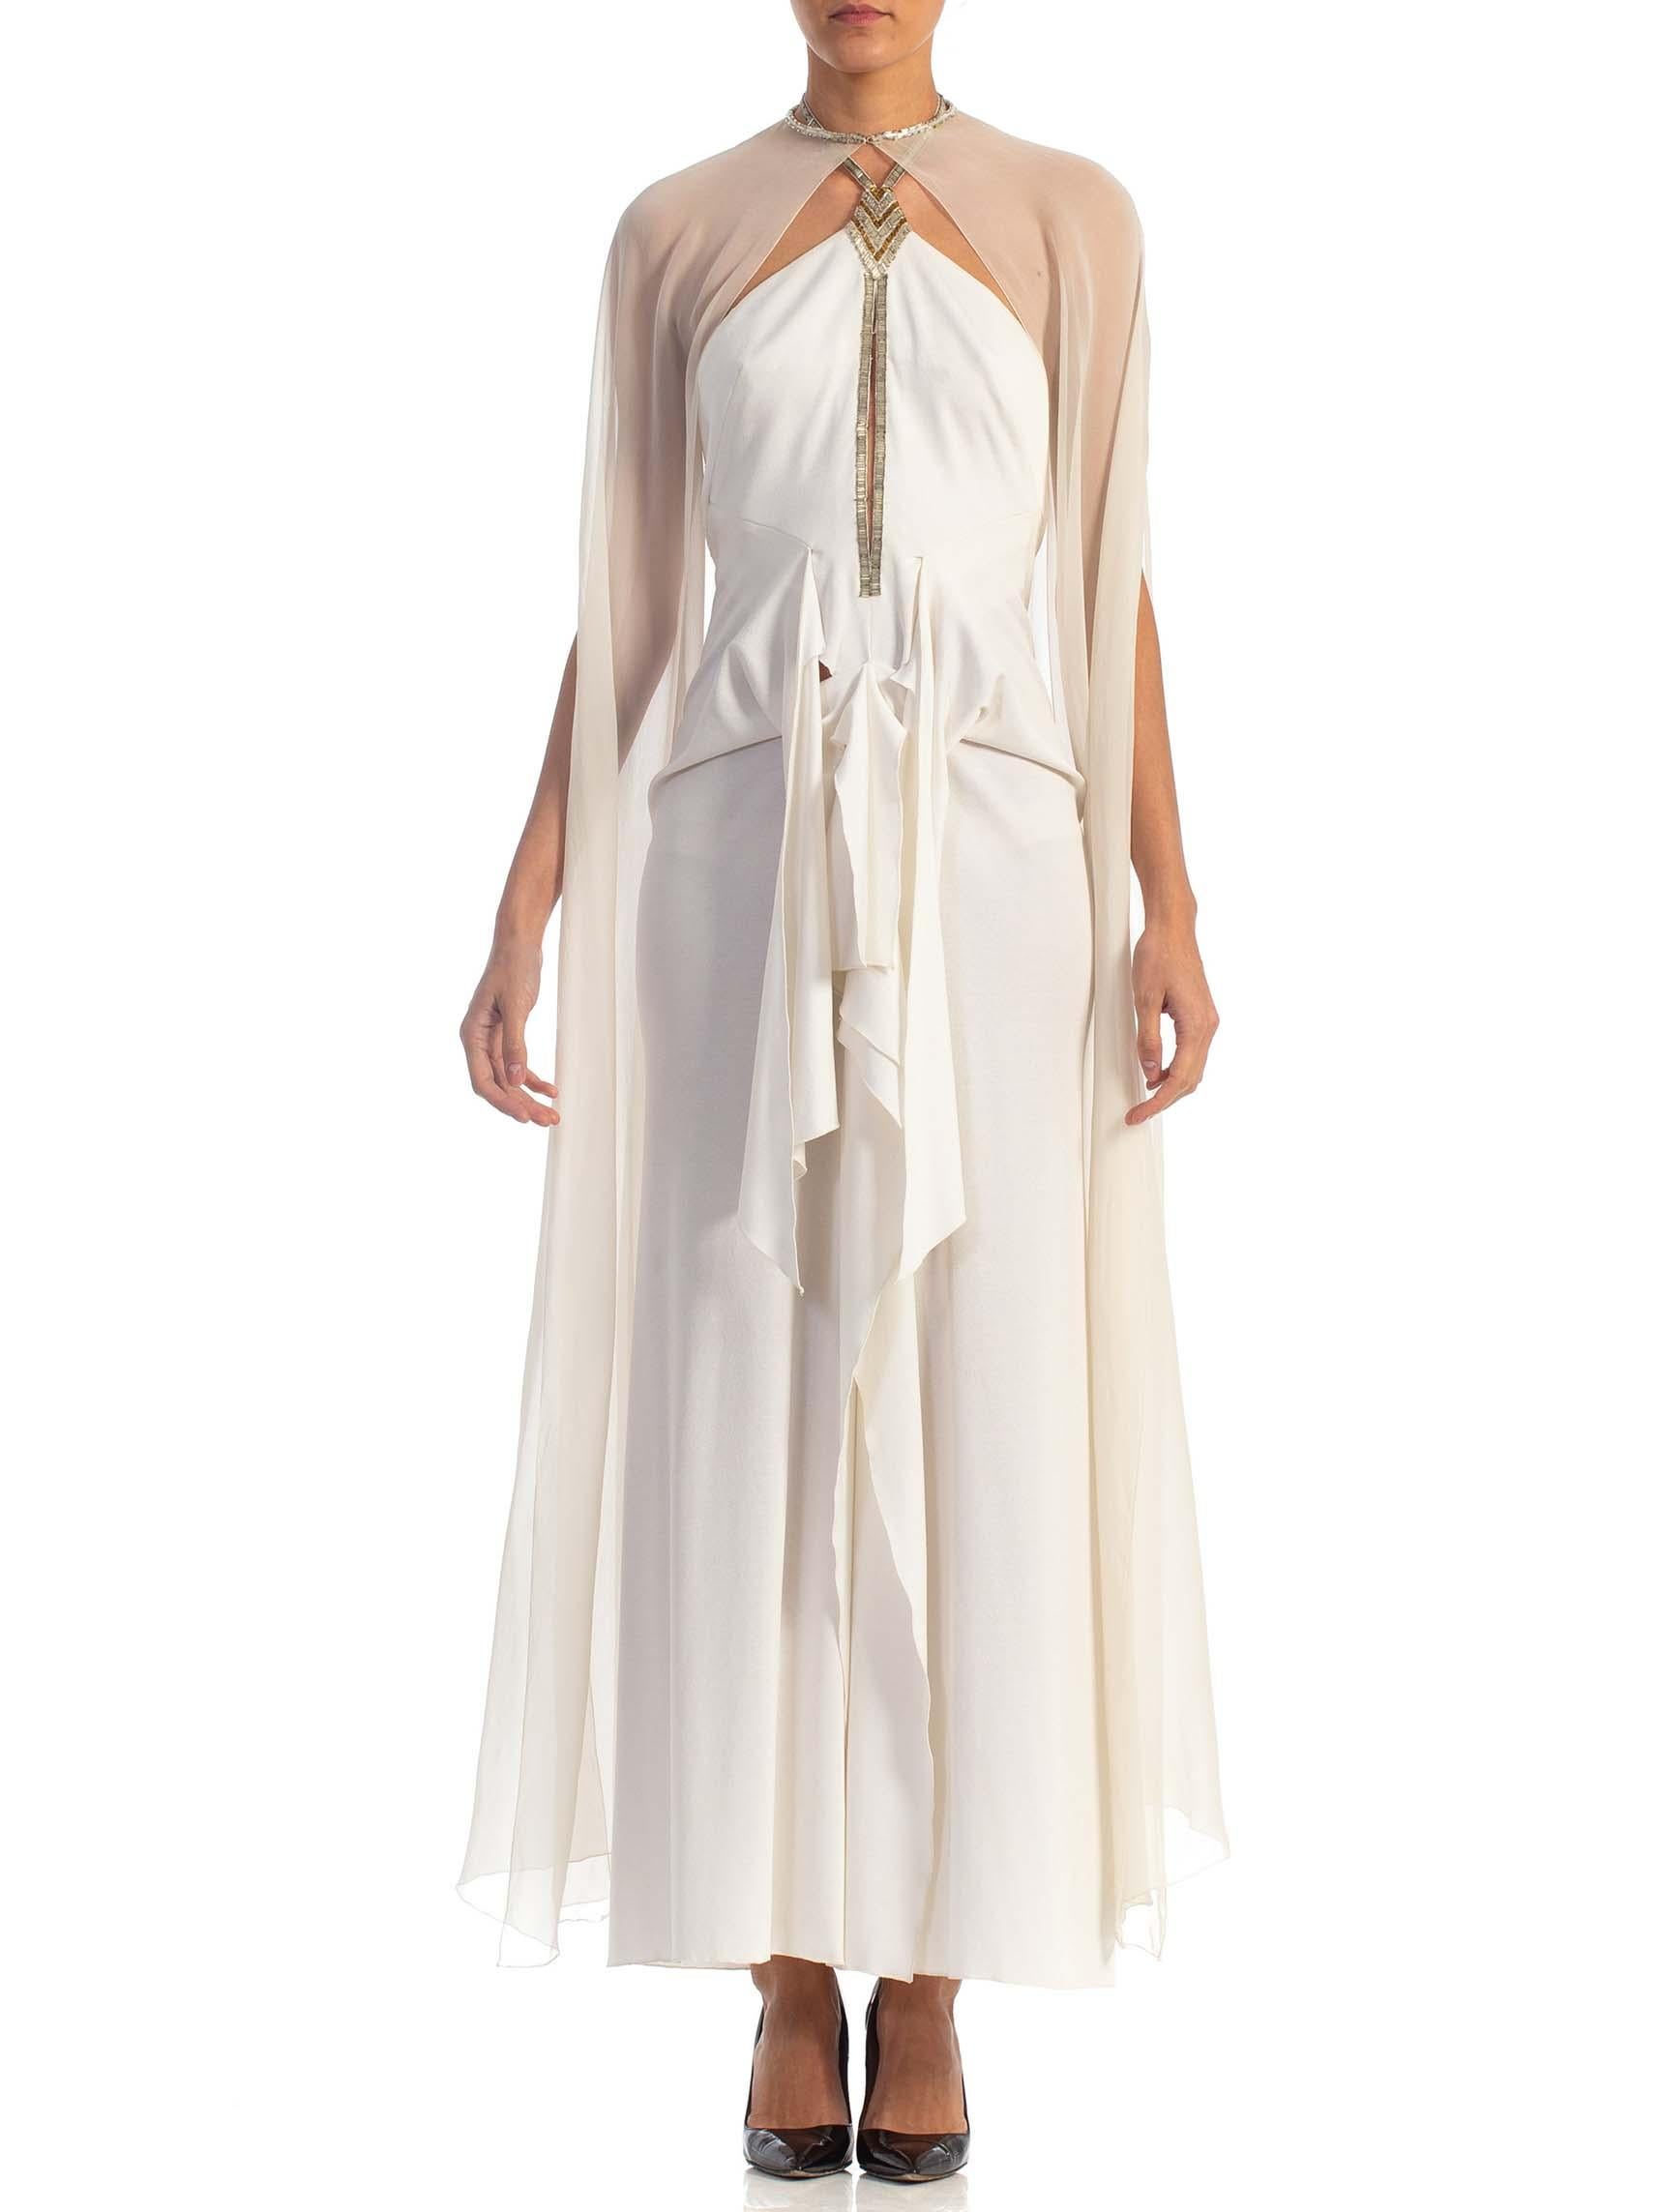 1970S AZZARO White Beaded Jersey Backless Halter Neck Disco Gown With Silk Chiffon Cape